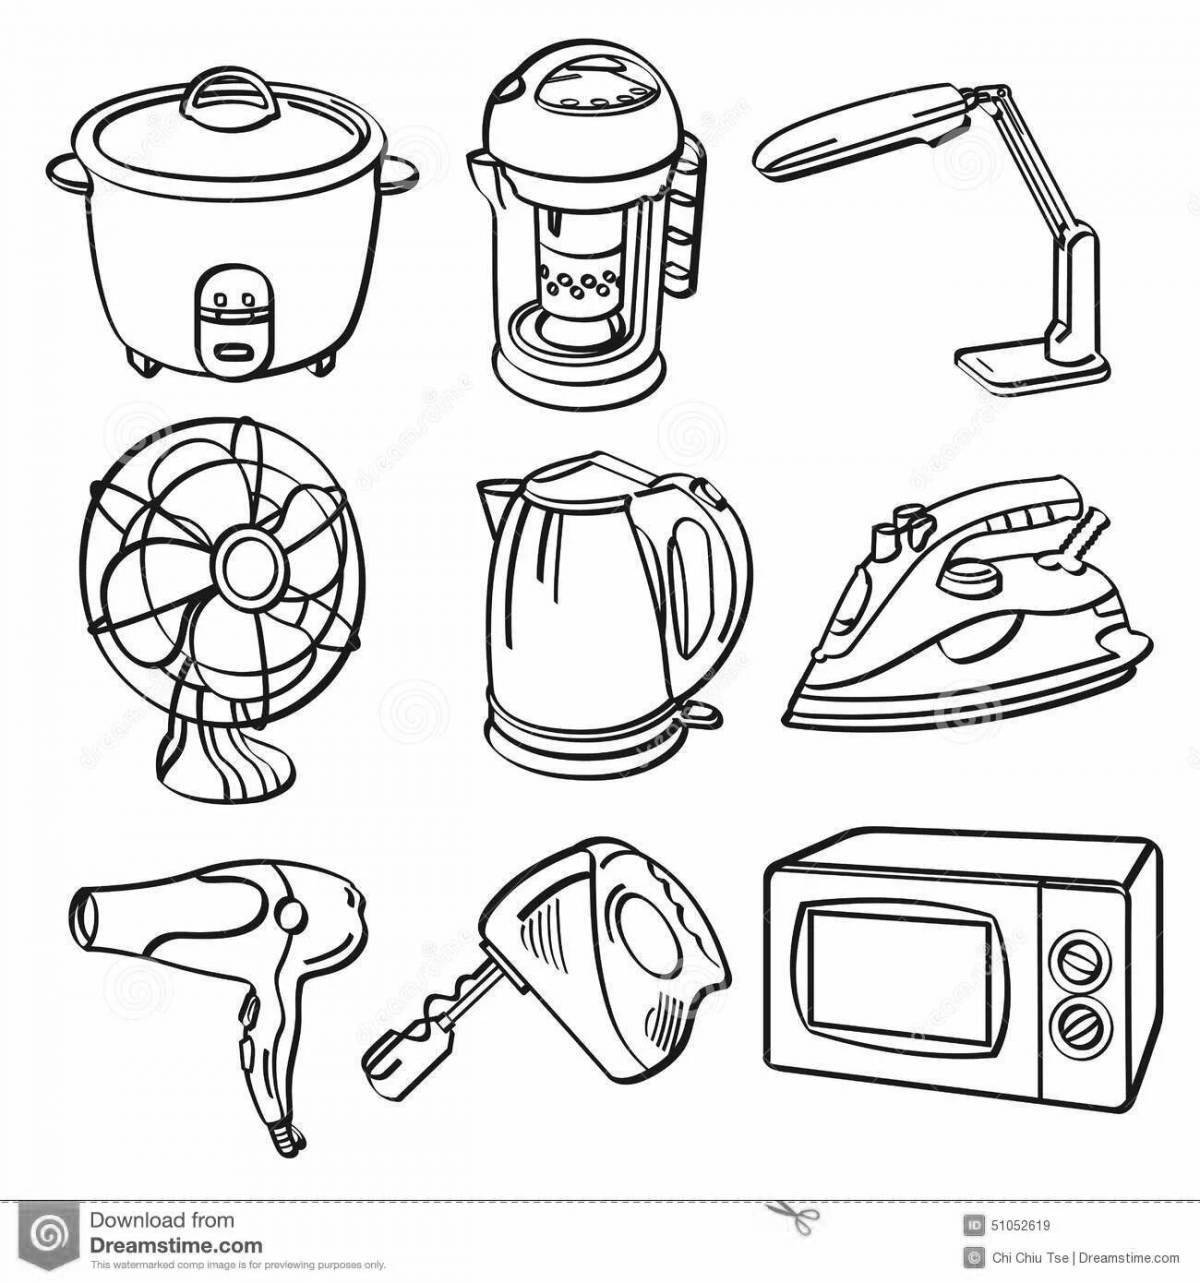 Fun coloring of household appliances